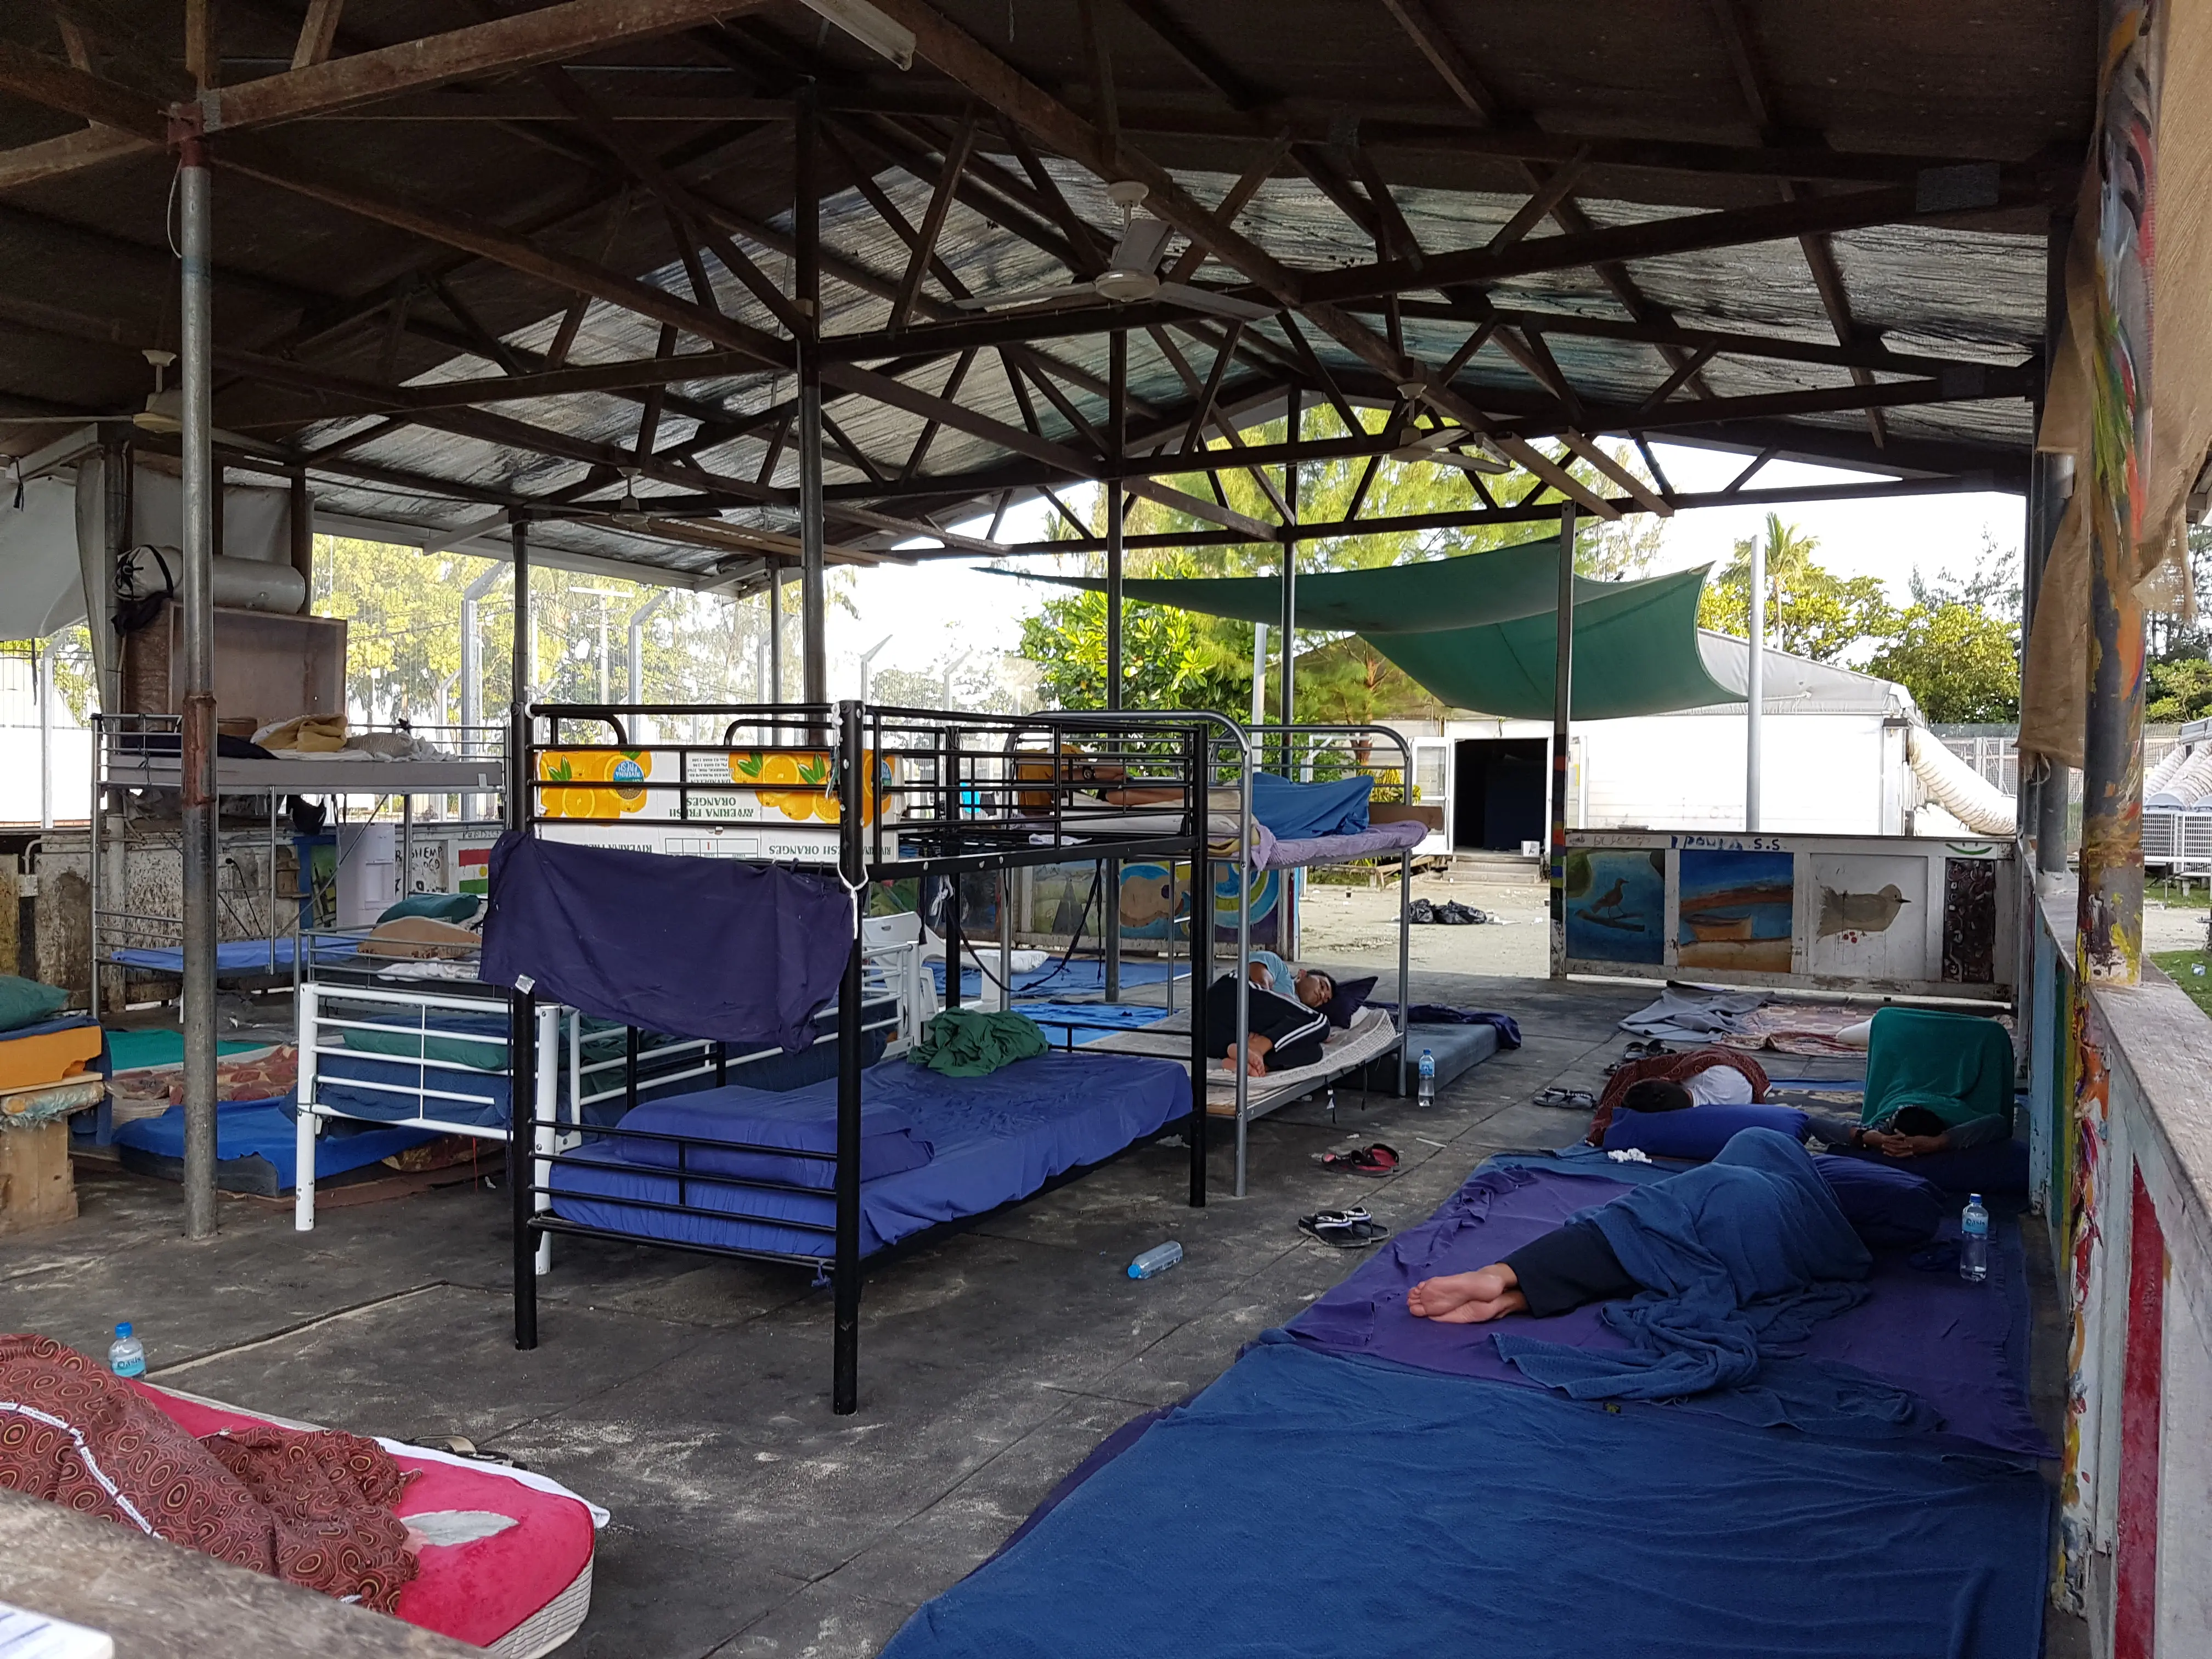 Refugees sleep outside on the ground and in bunk beds